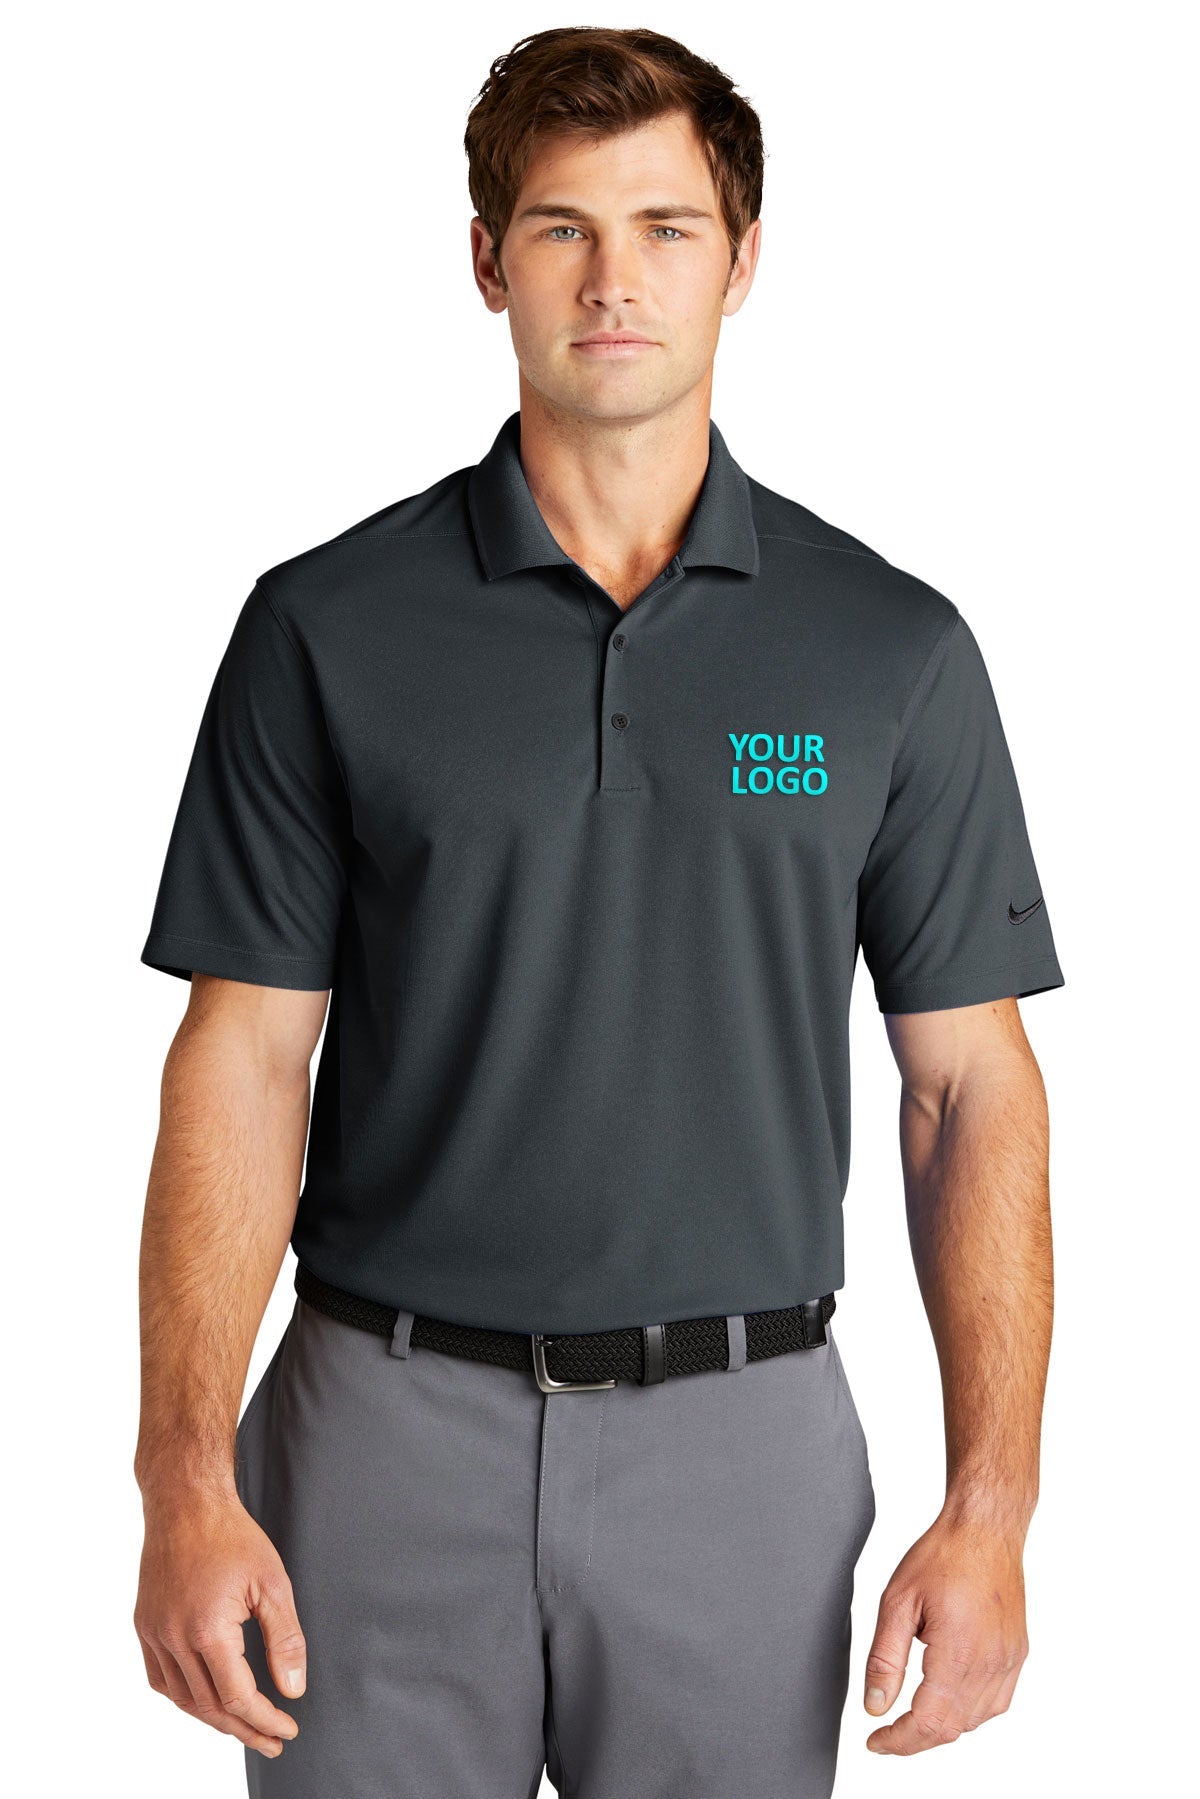 Nike Anthracite NKDC1963 custom embroidered polo shirts